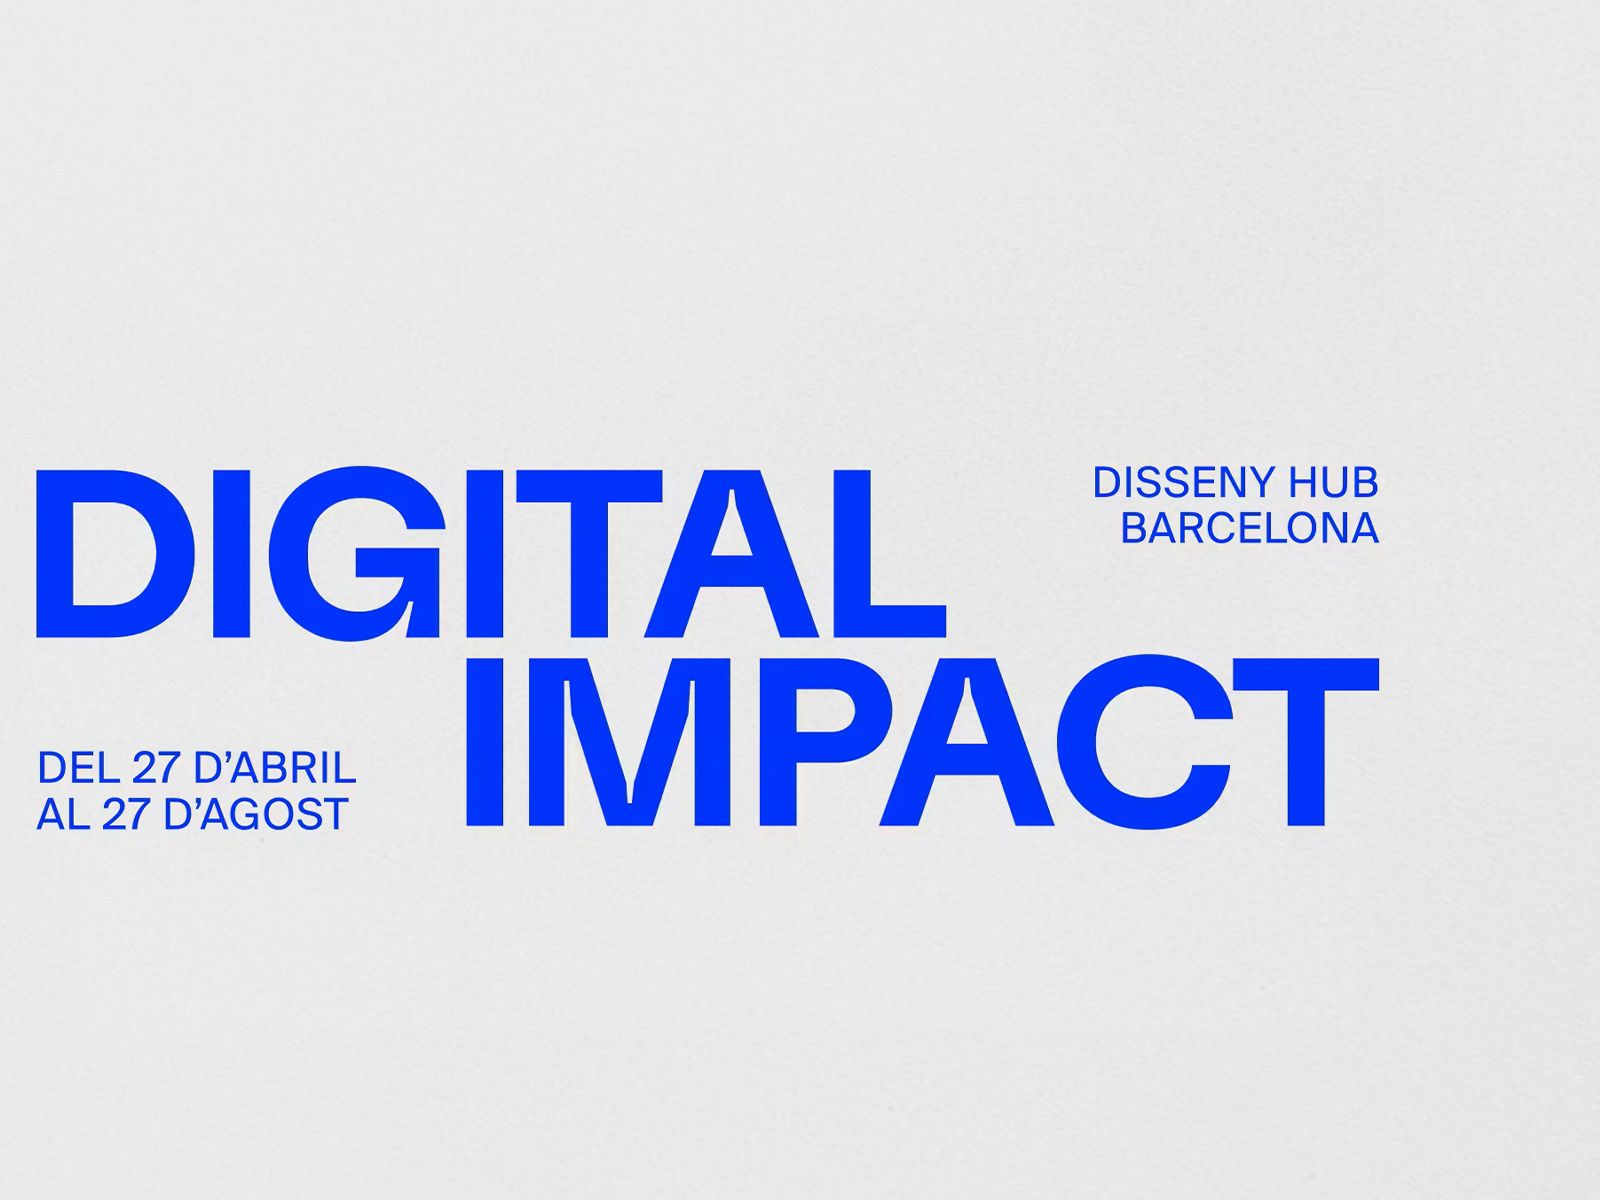 All about DIGITAL IMPACT: The largest exhibition of leading artists in the field of digital art and design